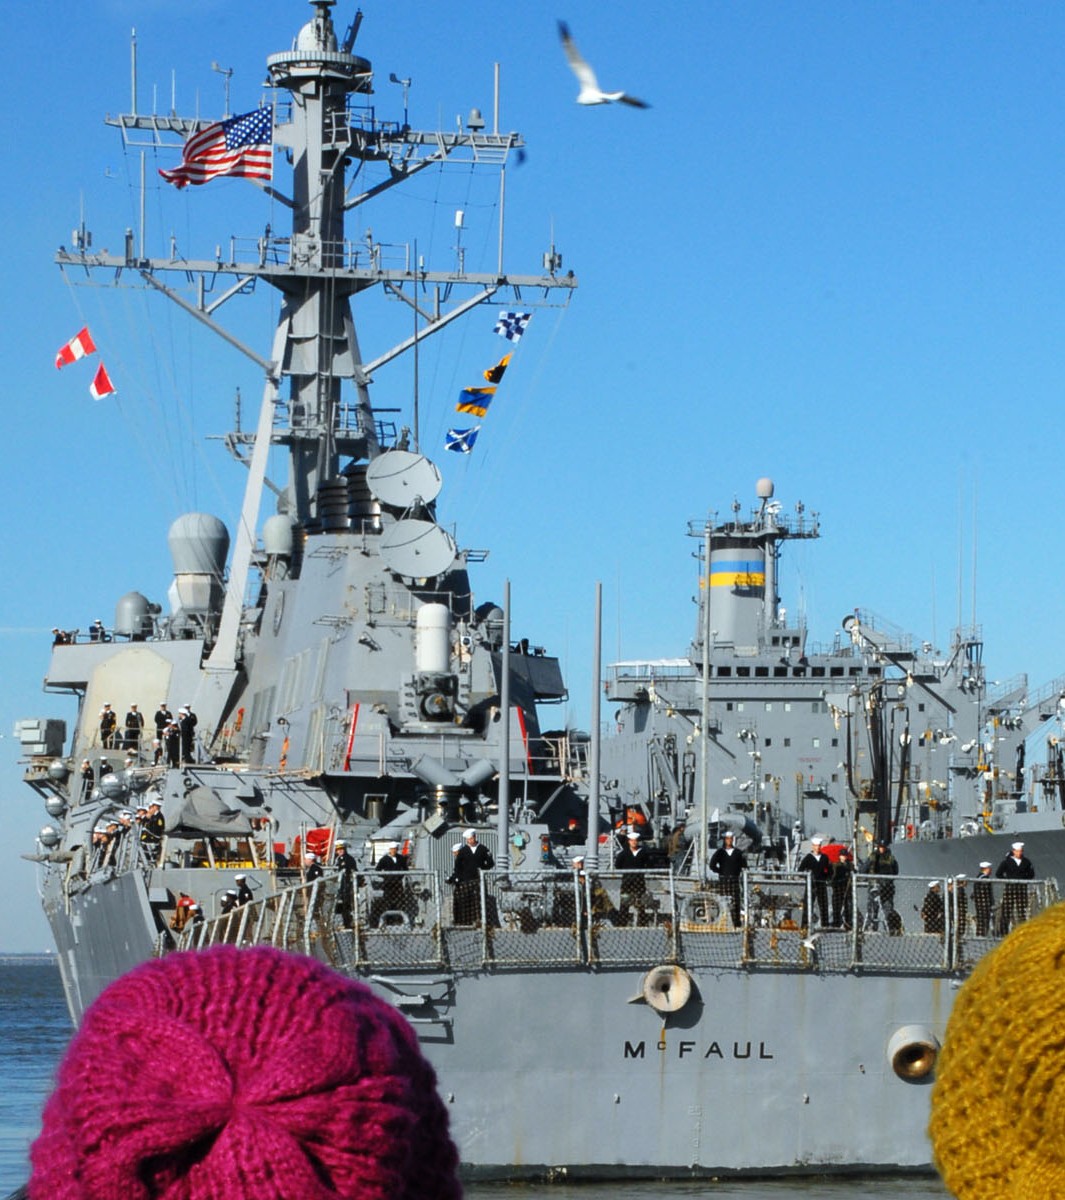 ddg-74 uss mcfaul guided missile destroyer arleigh burke class aegis bmd 32